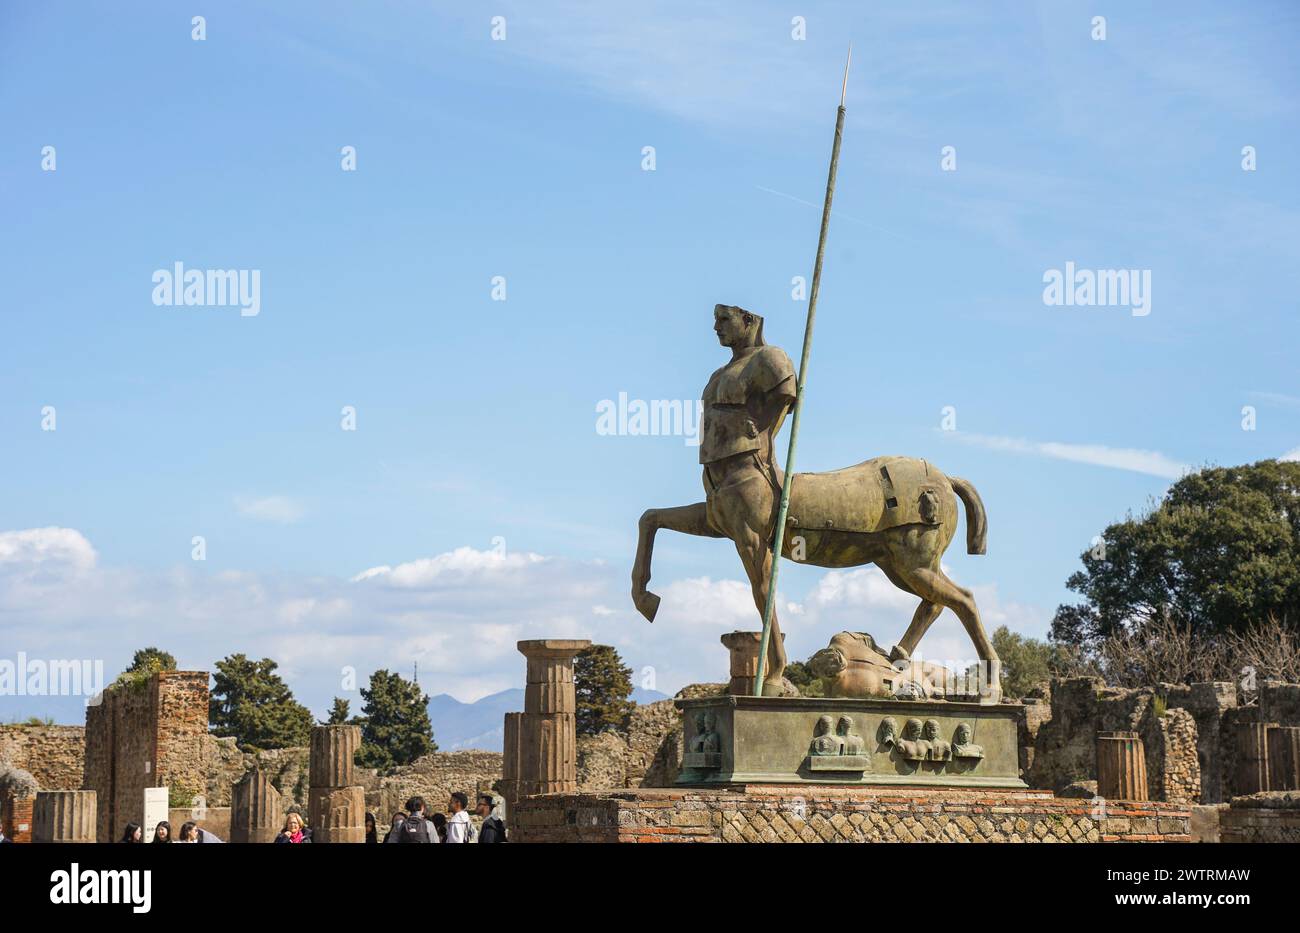 Centaur Statue, Forum of Pompeii square, centre of life in ancient Pompeii, The city of Pompeii was an ancient Roman city near Naples, Italy Stock Photo